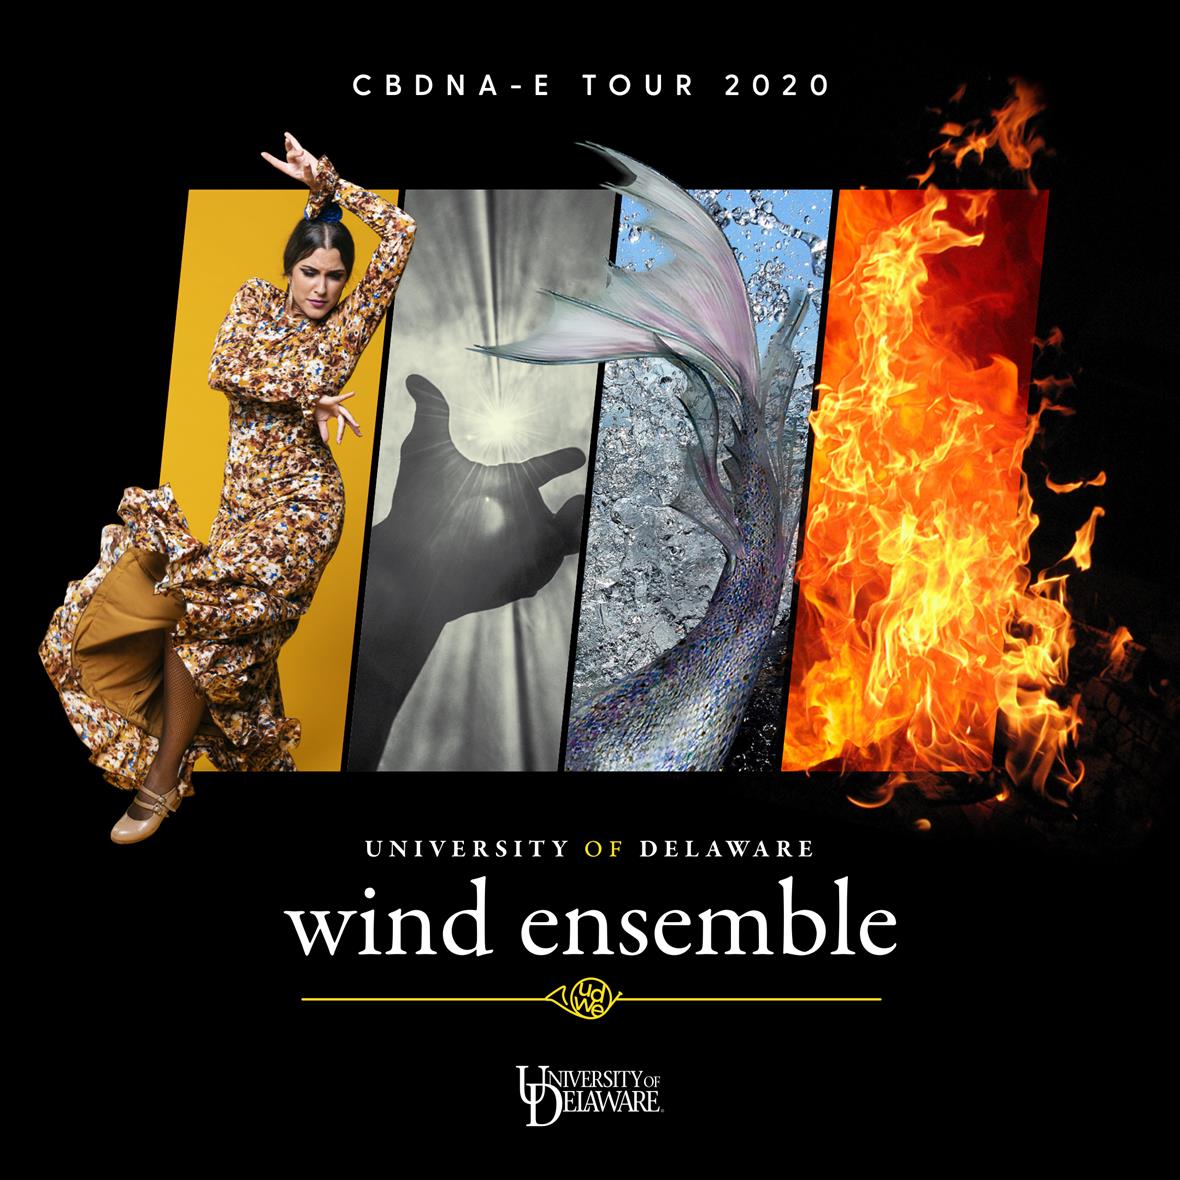 Cover of the 2020 tour booklet with images of a flamenco dancer, the shadow of a hand, a fish tail, and fire